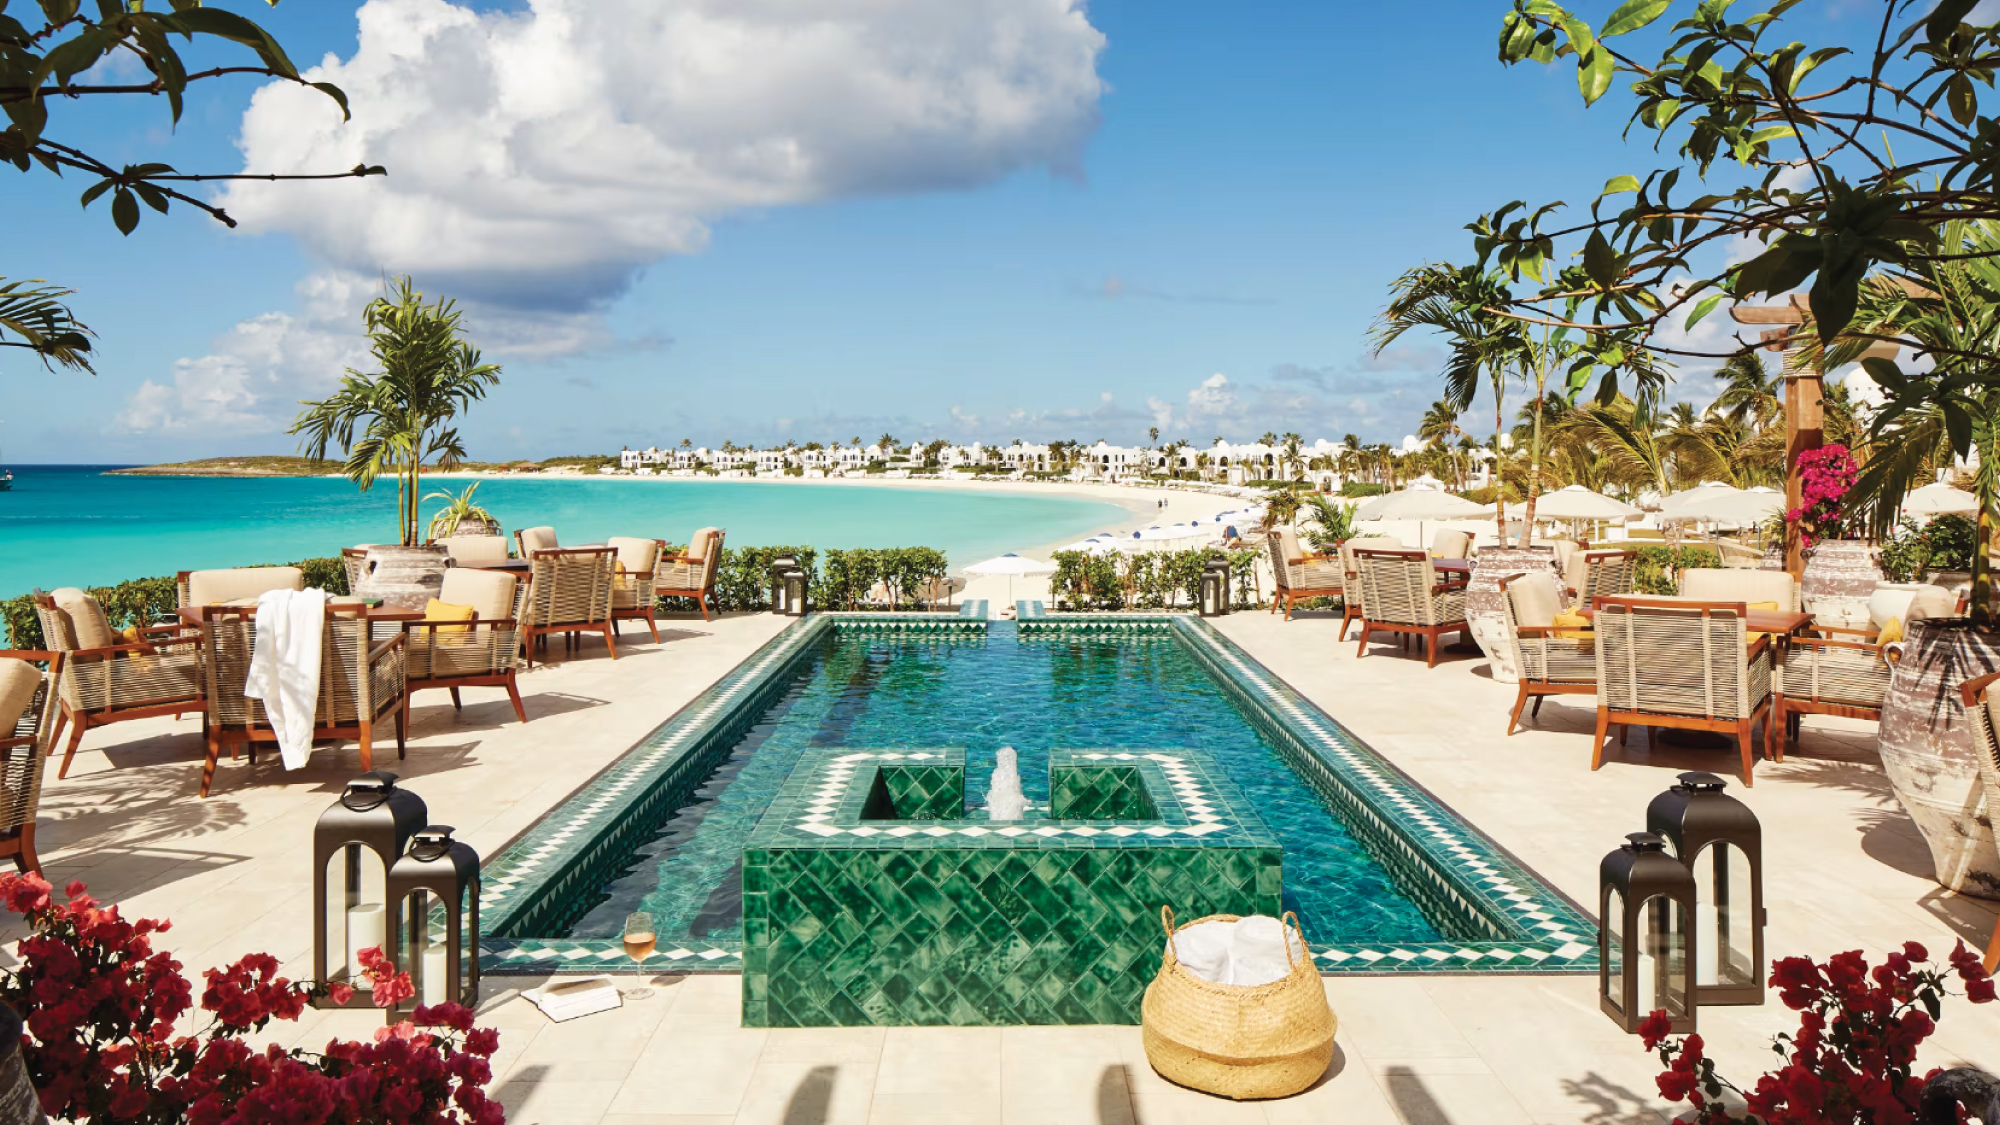 A tranquil scene of the pool at Belmond Cap Juluca in The Valley, Anguilla, surrounded by lush greenery and overlooking the azure Caribbean Sea. Tailored for self-flying pilots